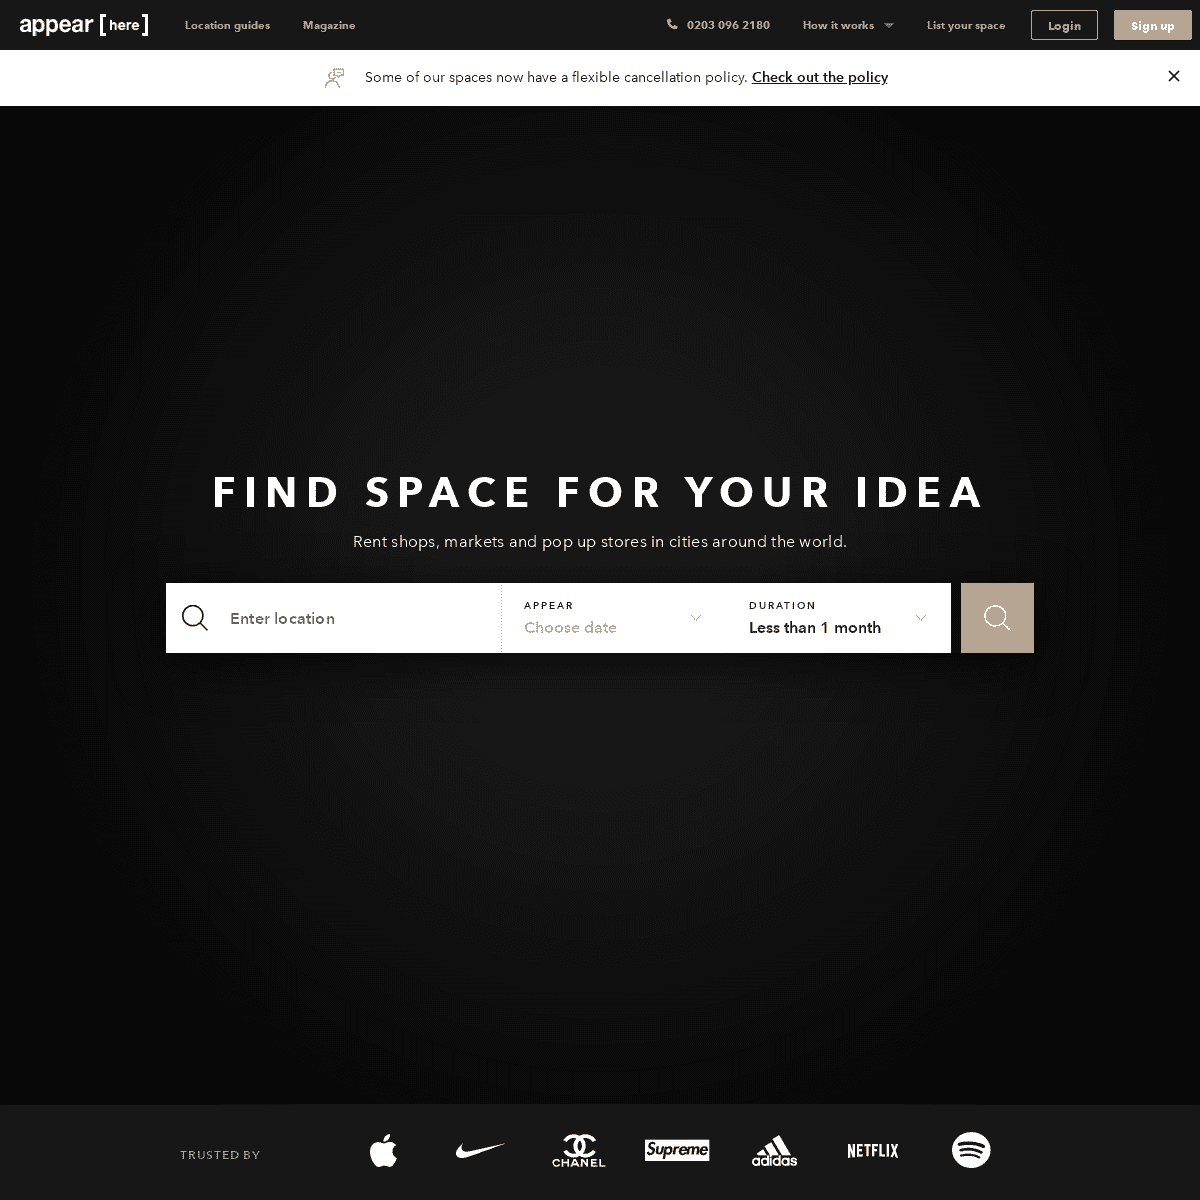 A complete backup of https://appearhere.co.uk